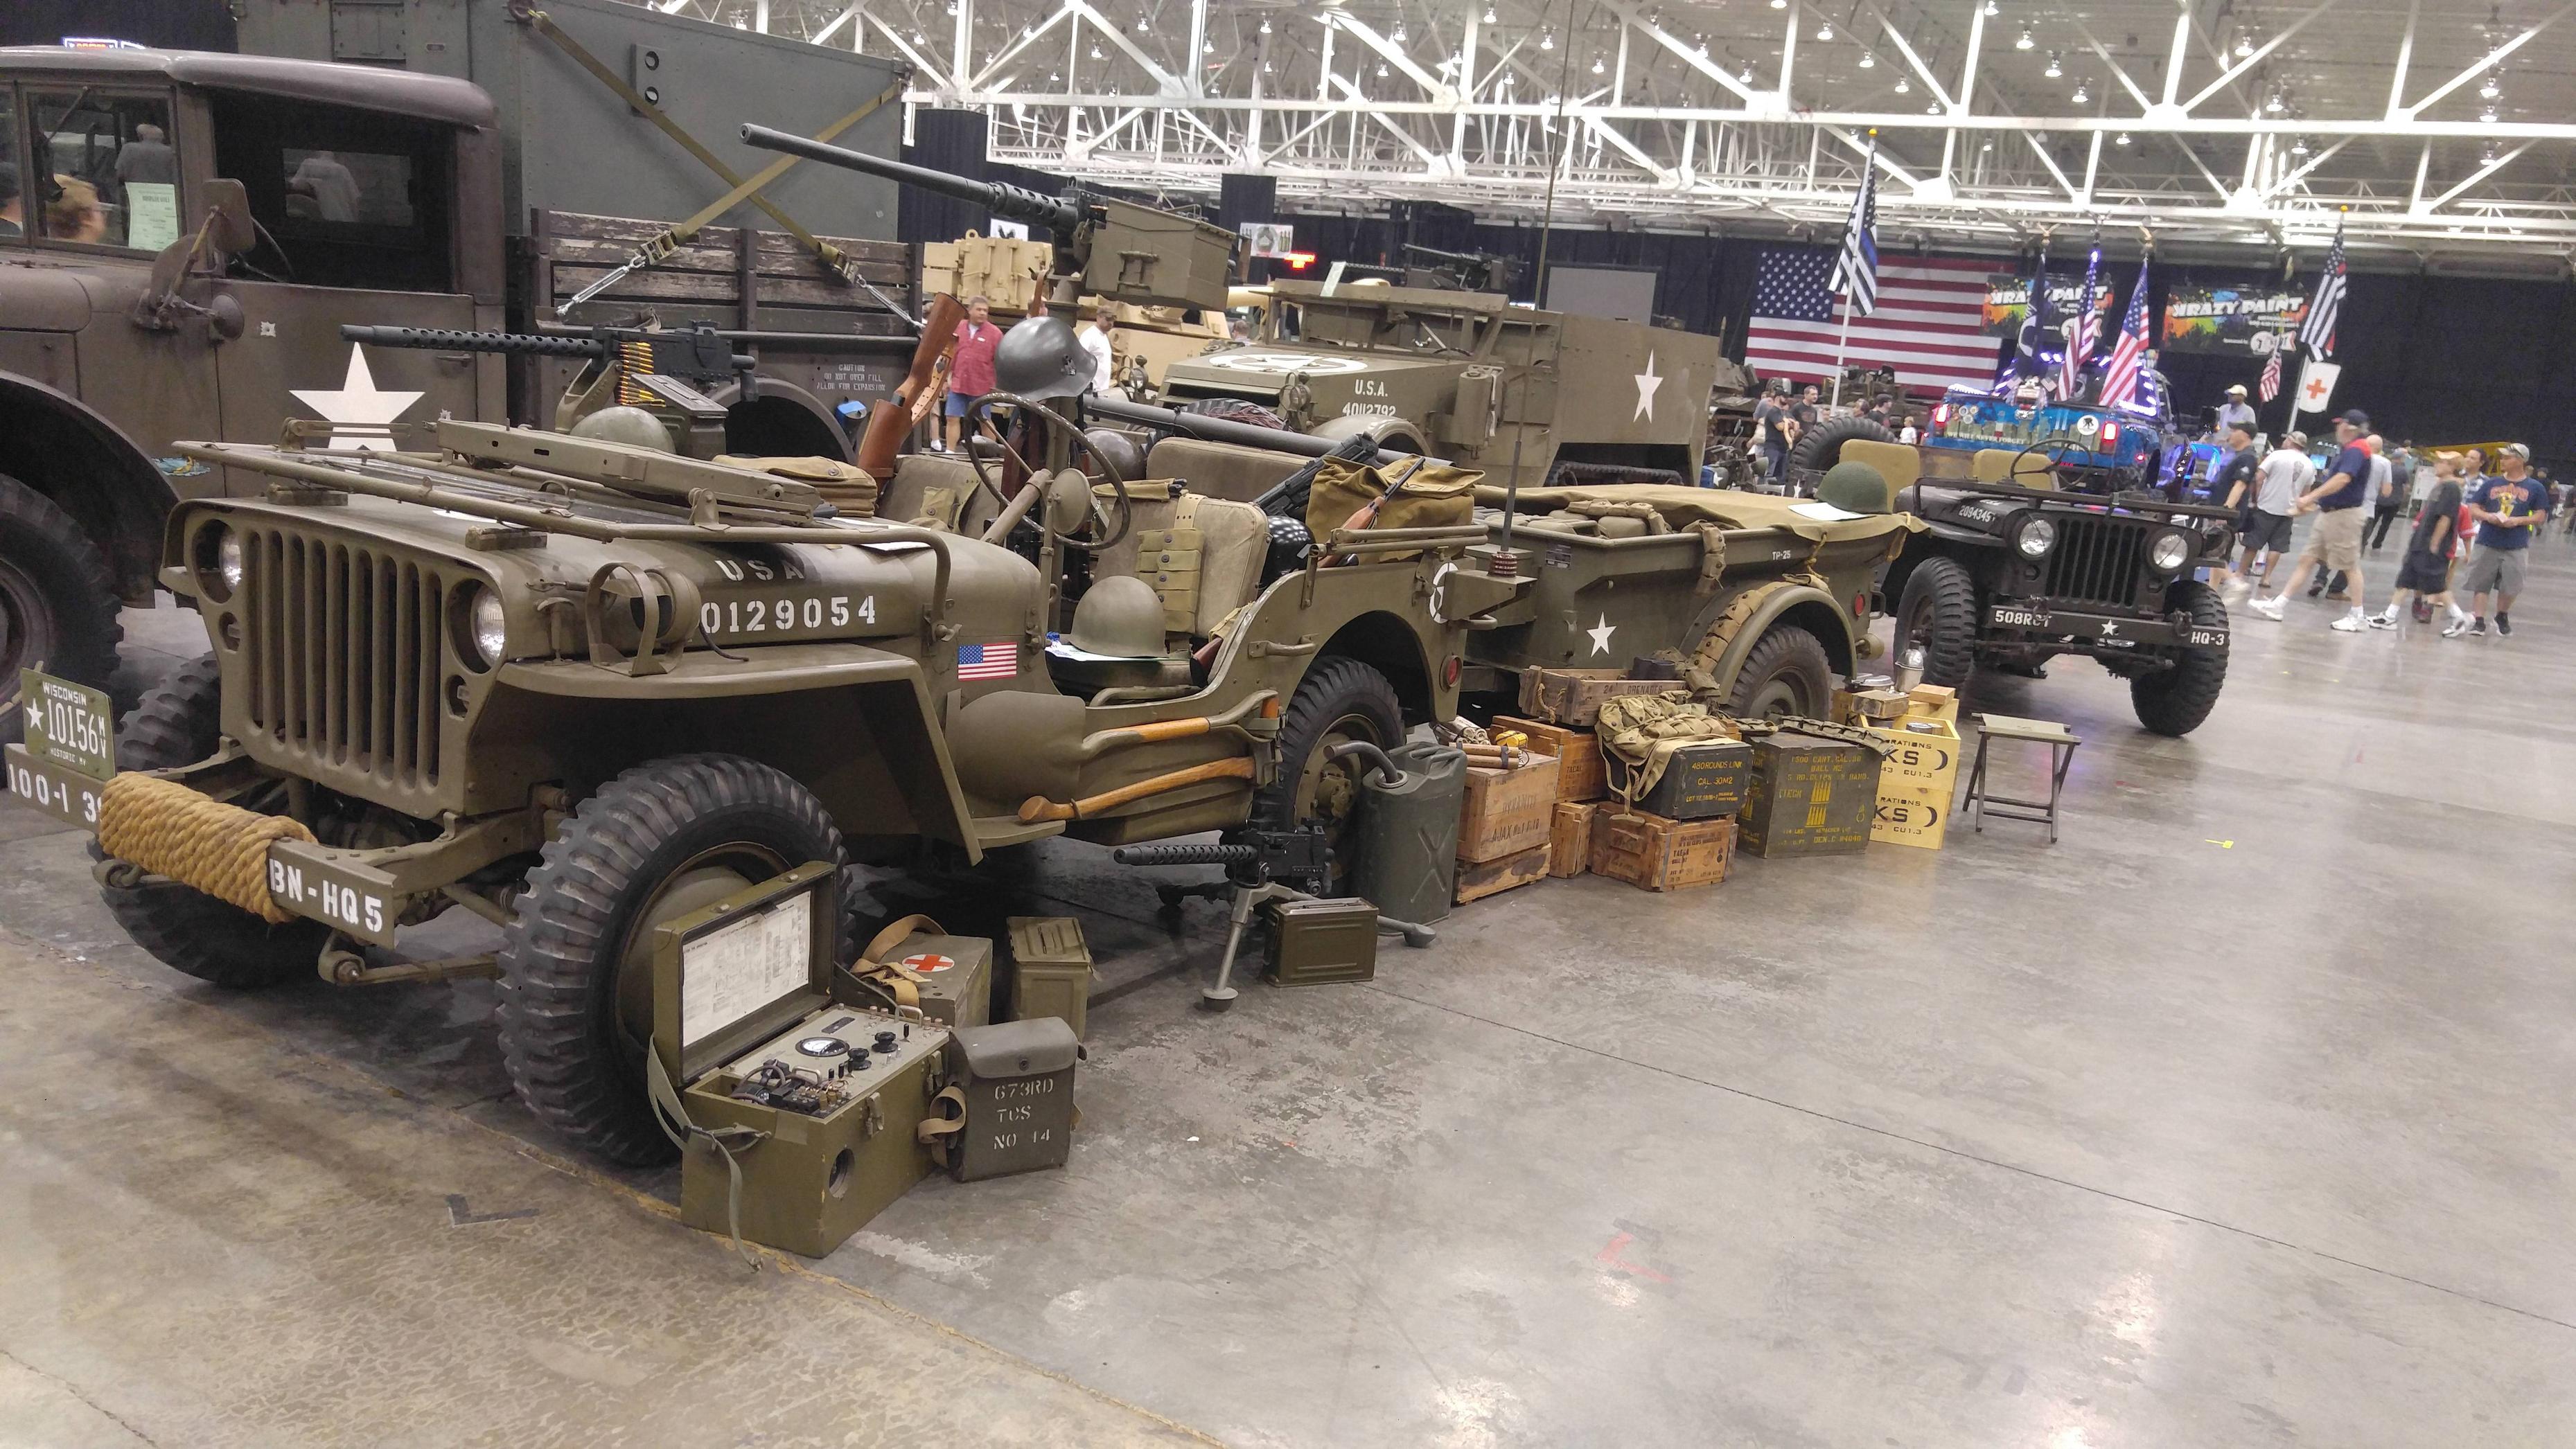 Awesome jeep display from IX center tank/military show : Jeep